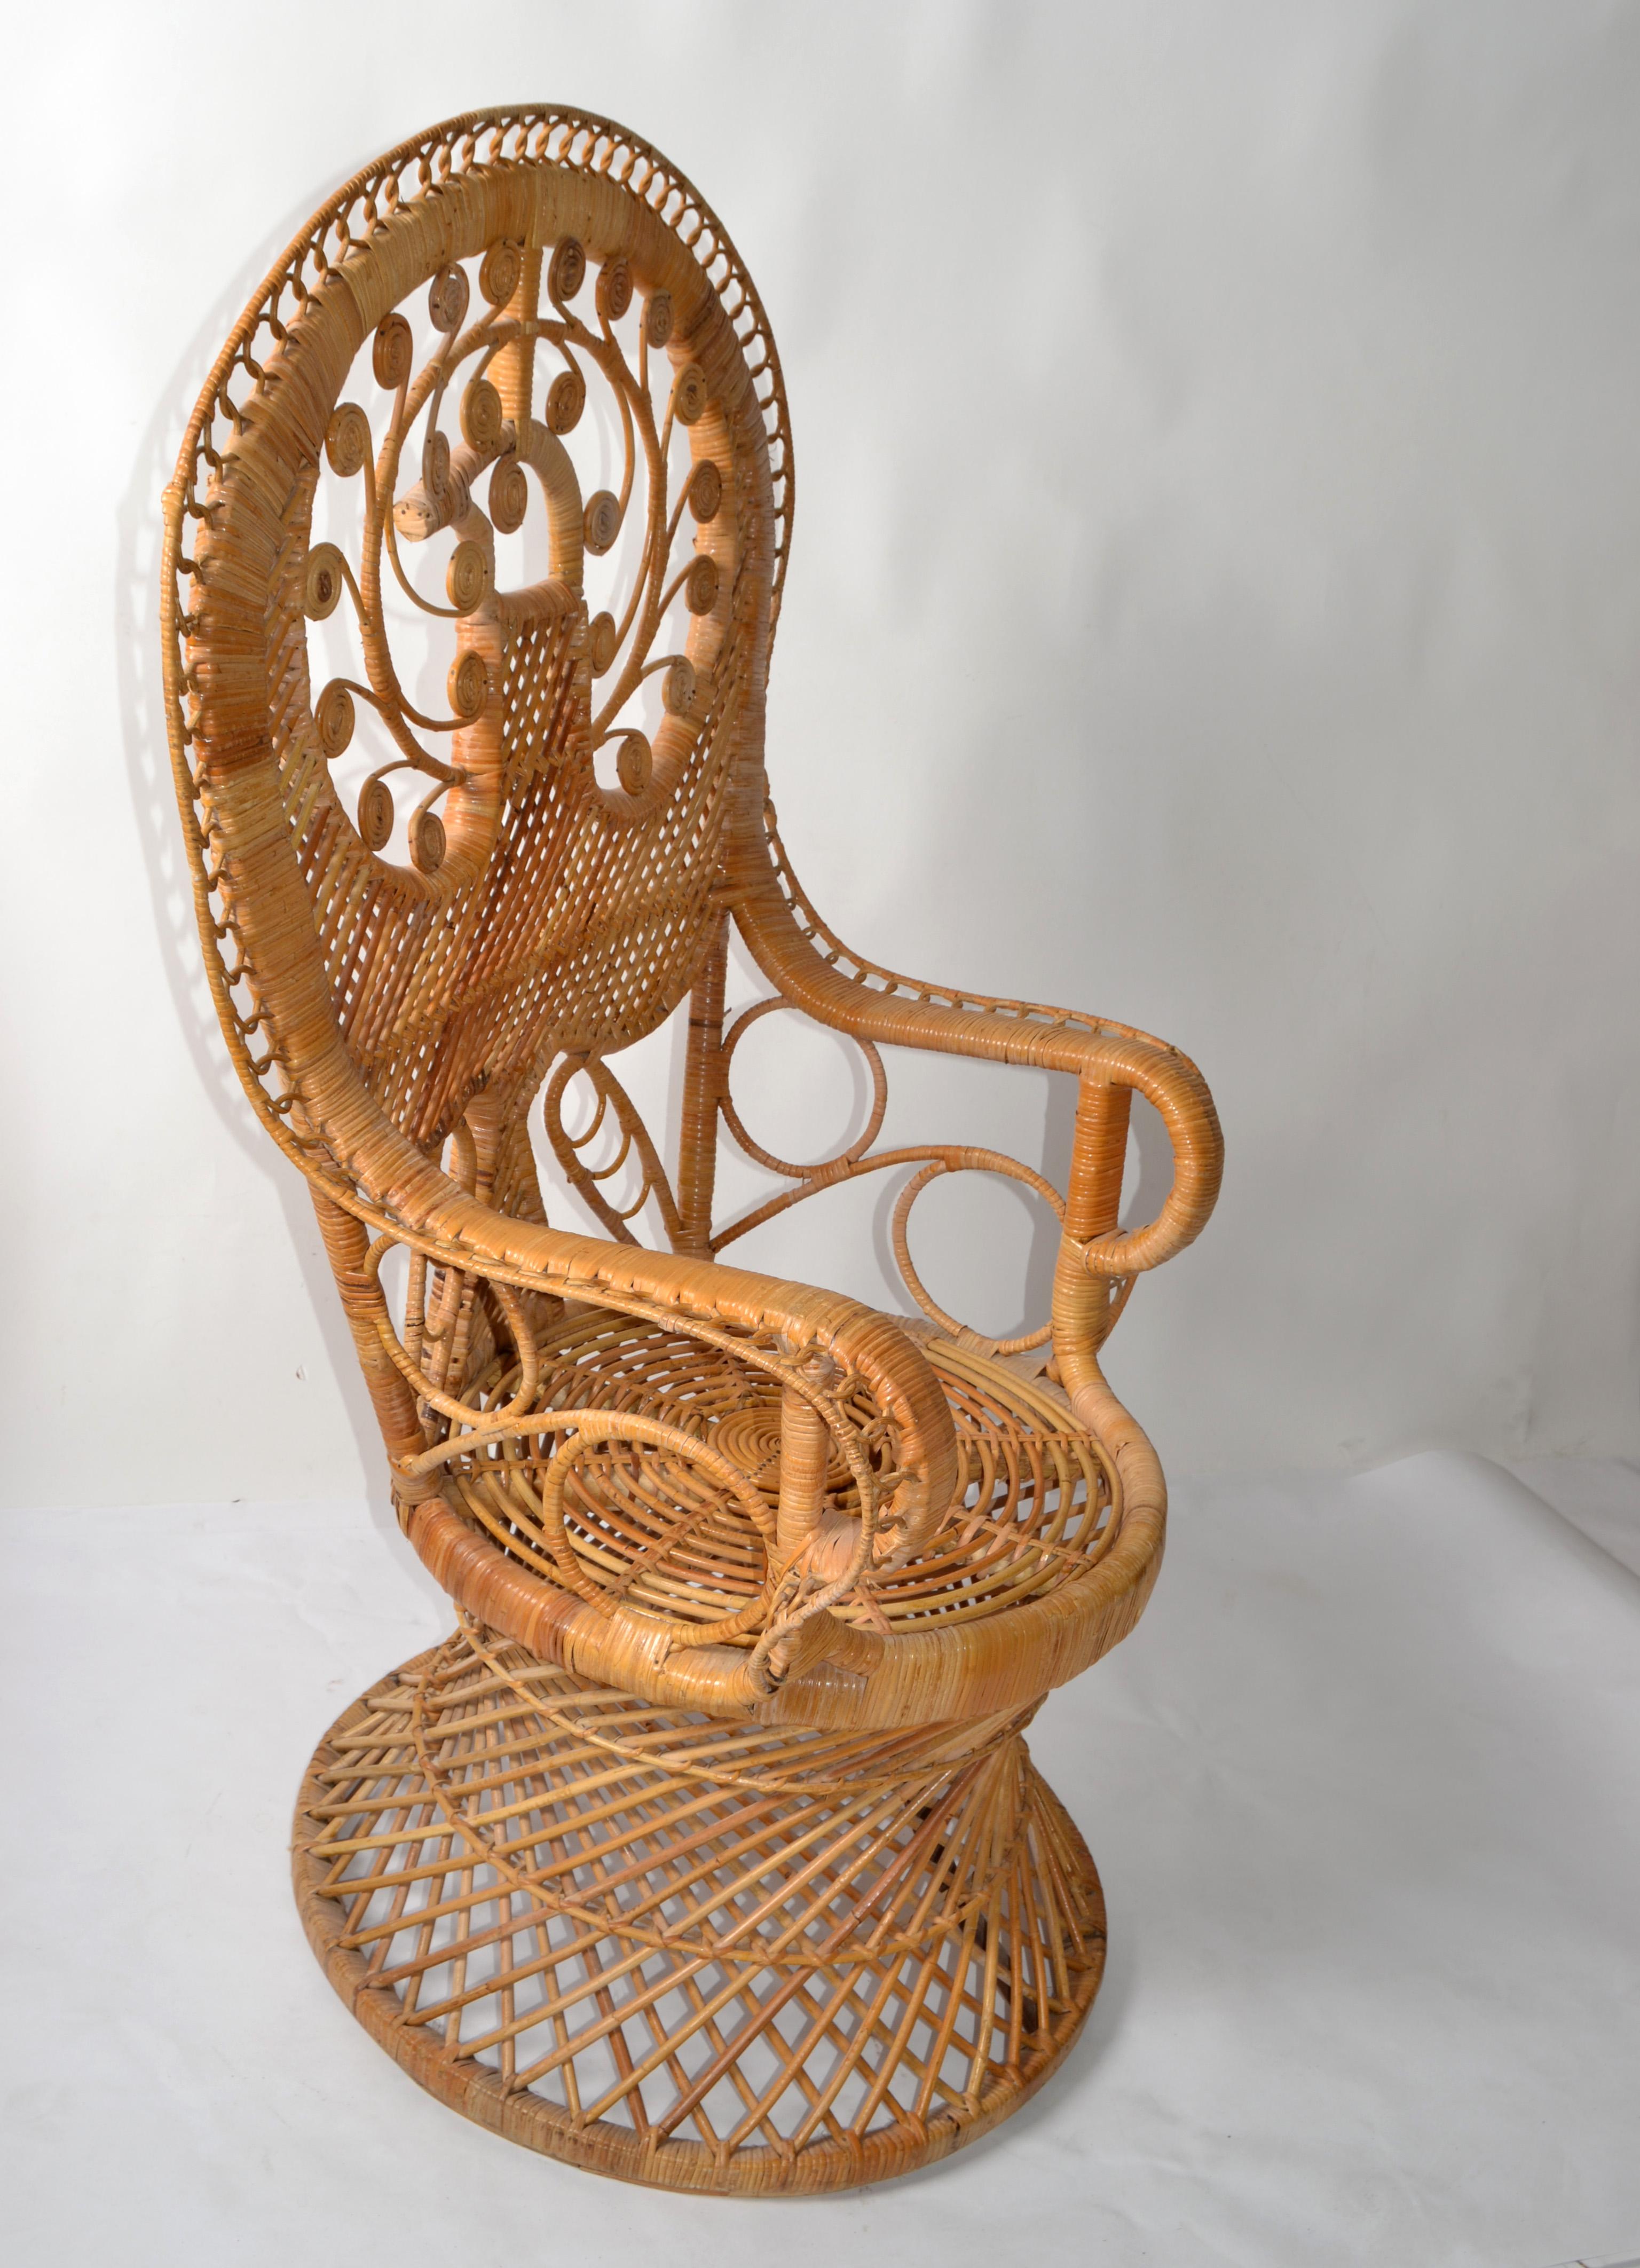 Américain Coastal Vintage Round Rattan Accent Table Hand-Woven Wicker Caning Peacock Chair en vente